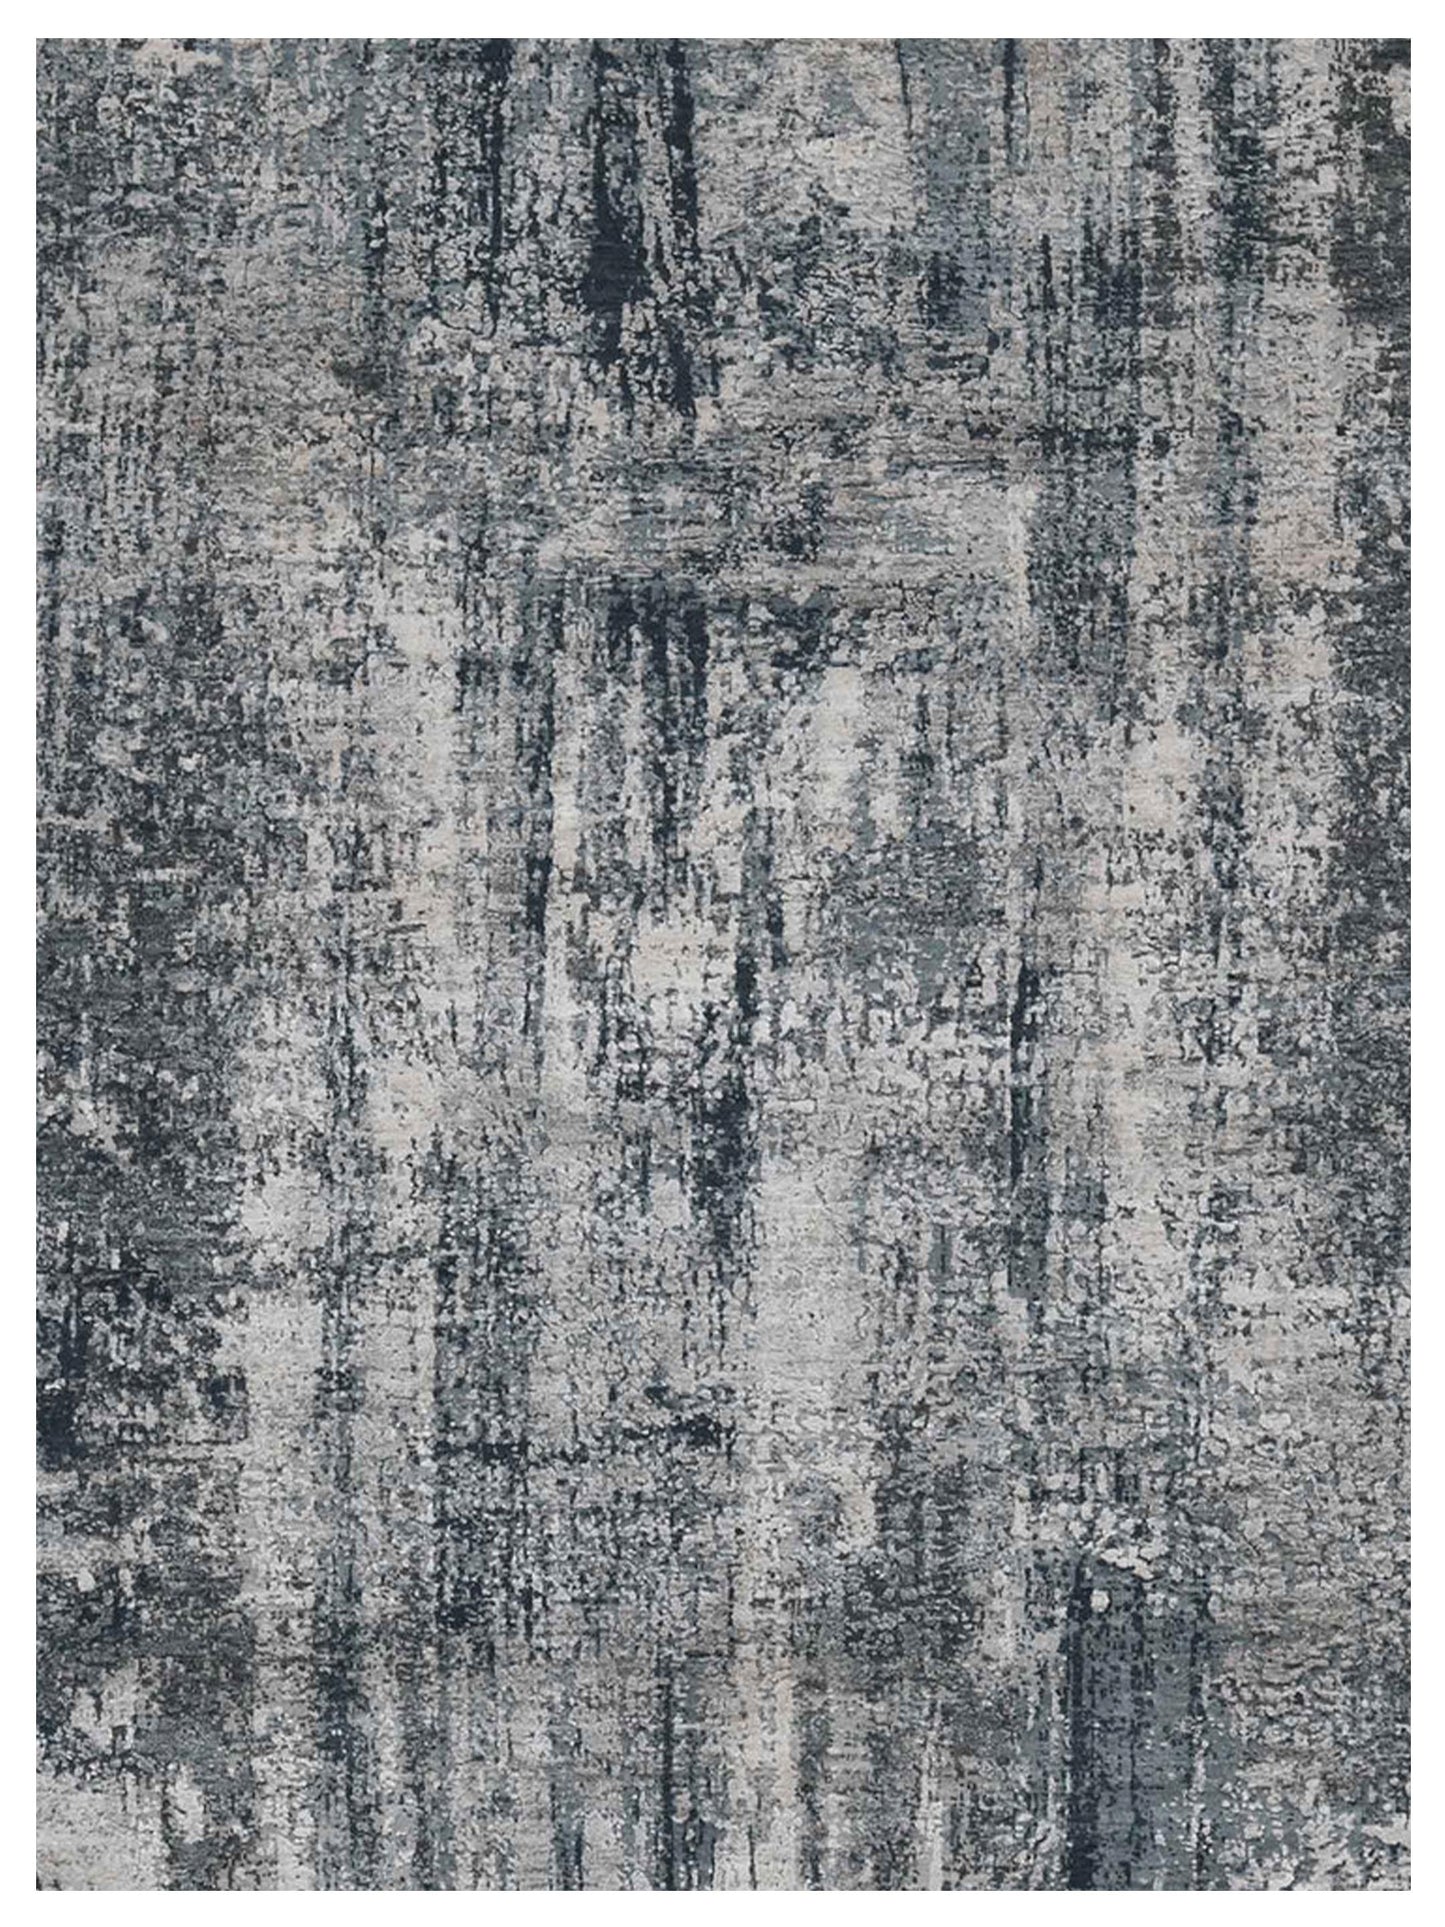 Limited Zelma WI-452 GRAPHITE  Transitional Knotted Rug